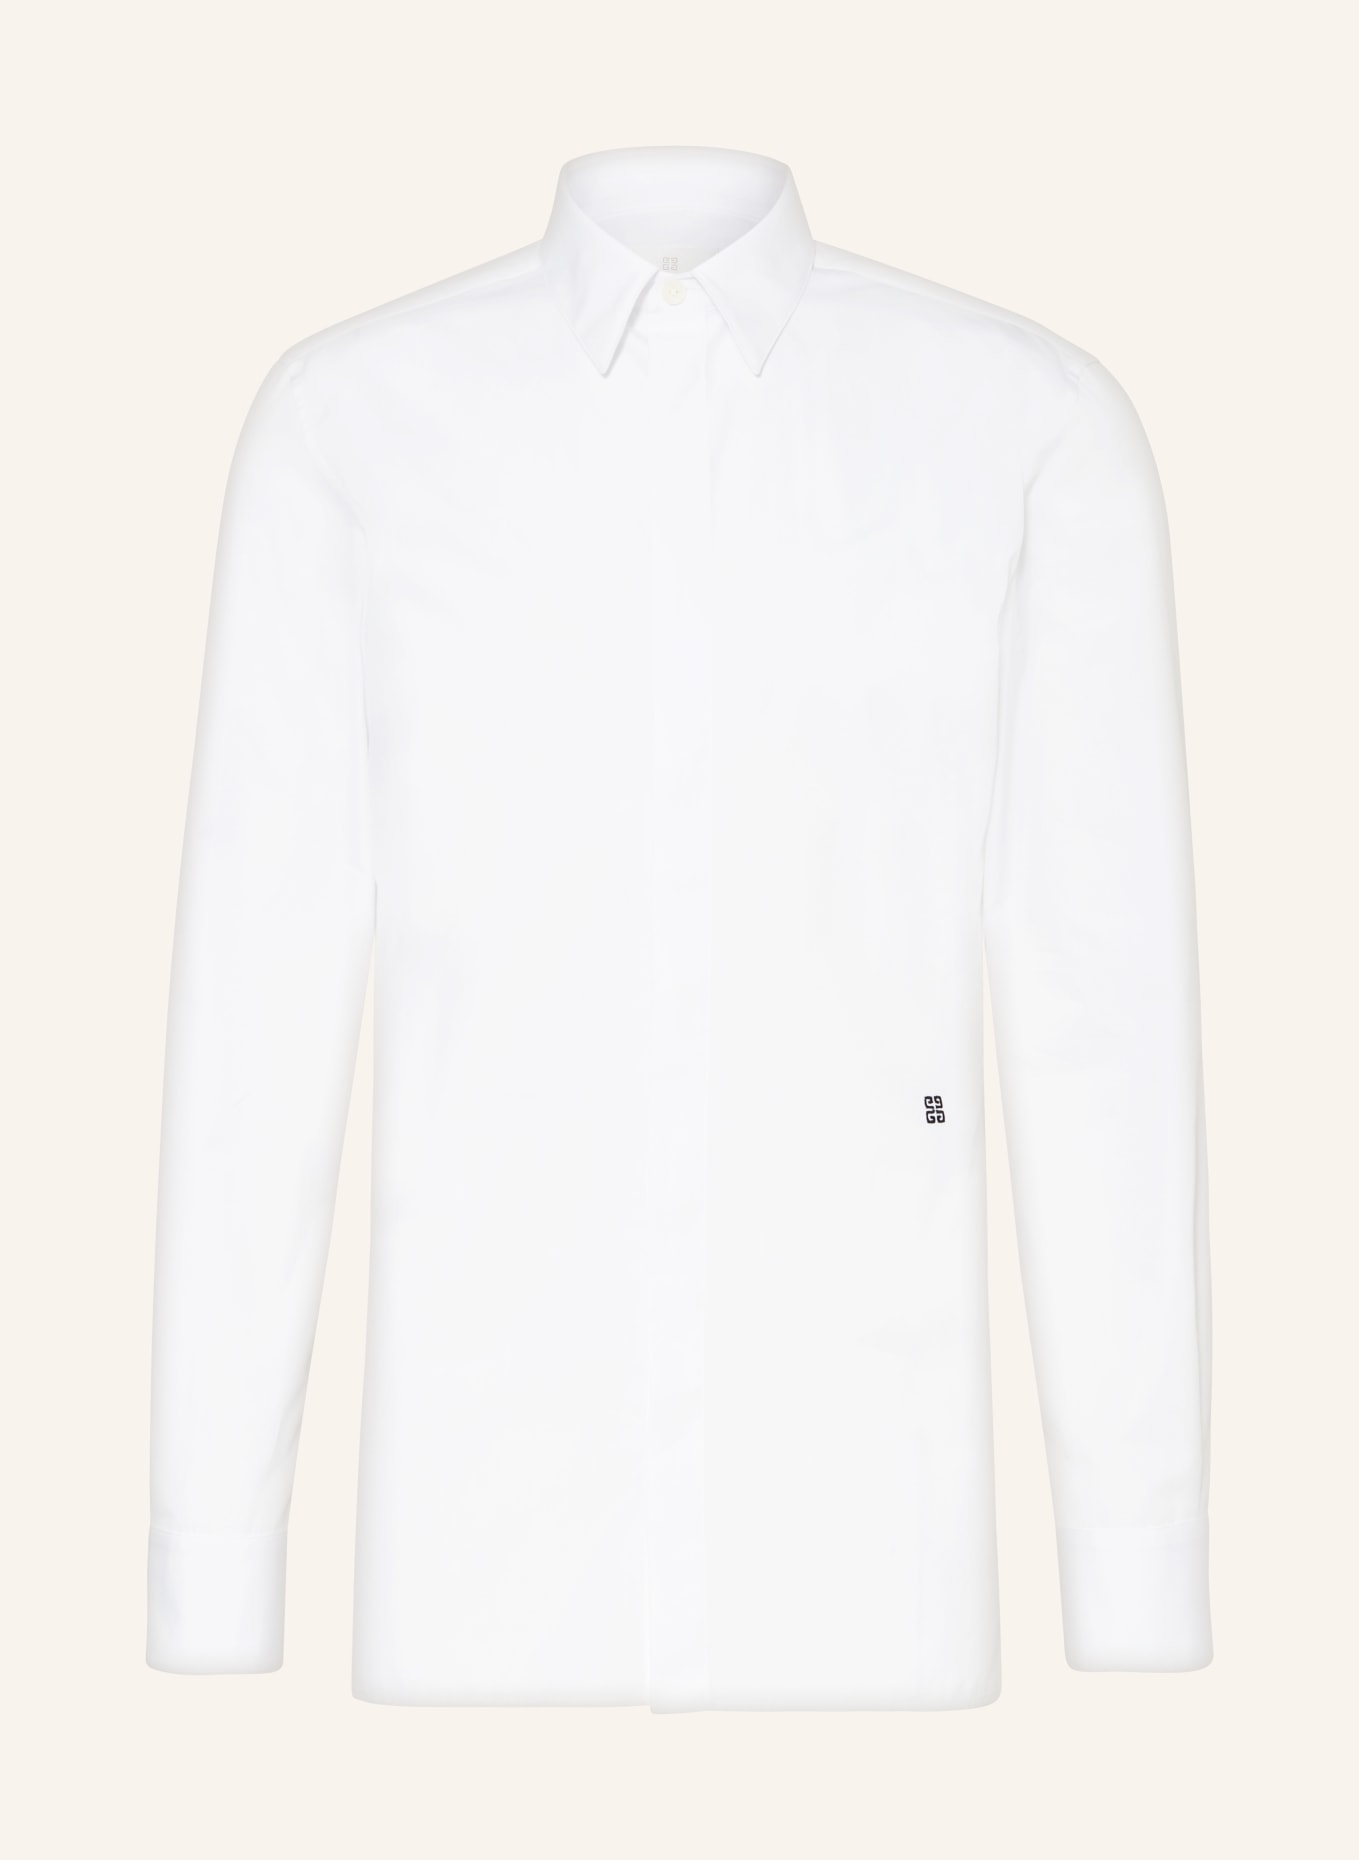 GIVENCHY Hemd Slim Fit, Farbe: WEISS (Bild 1)